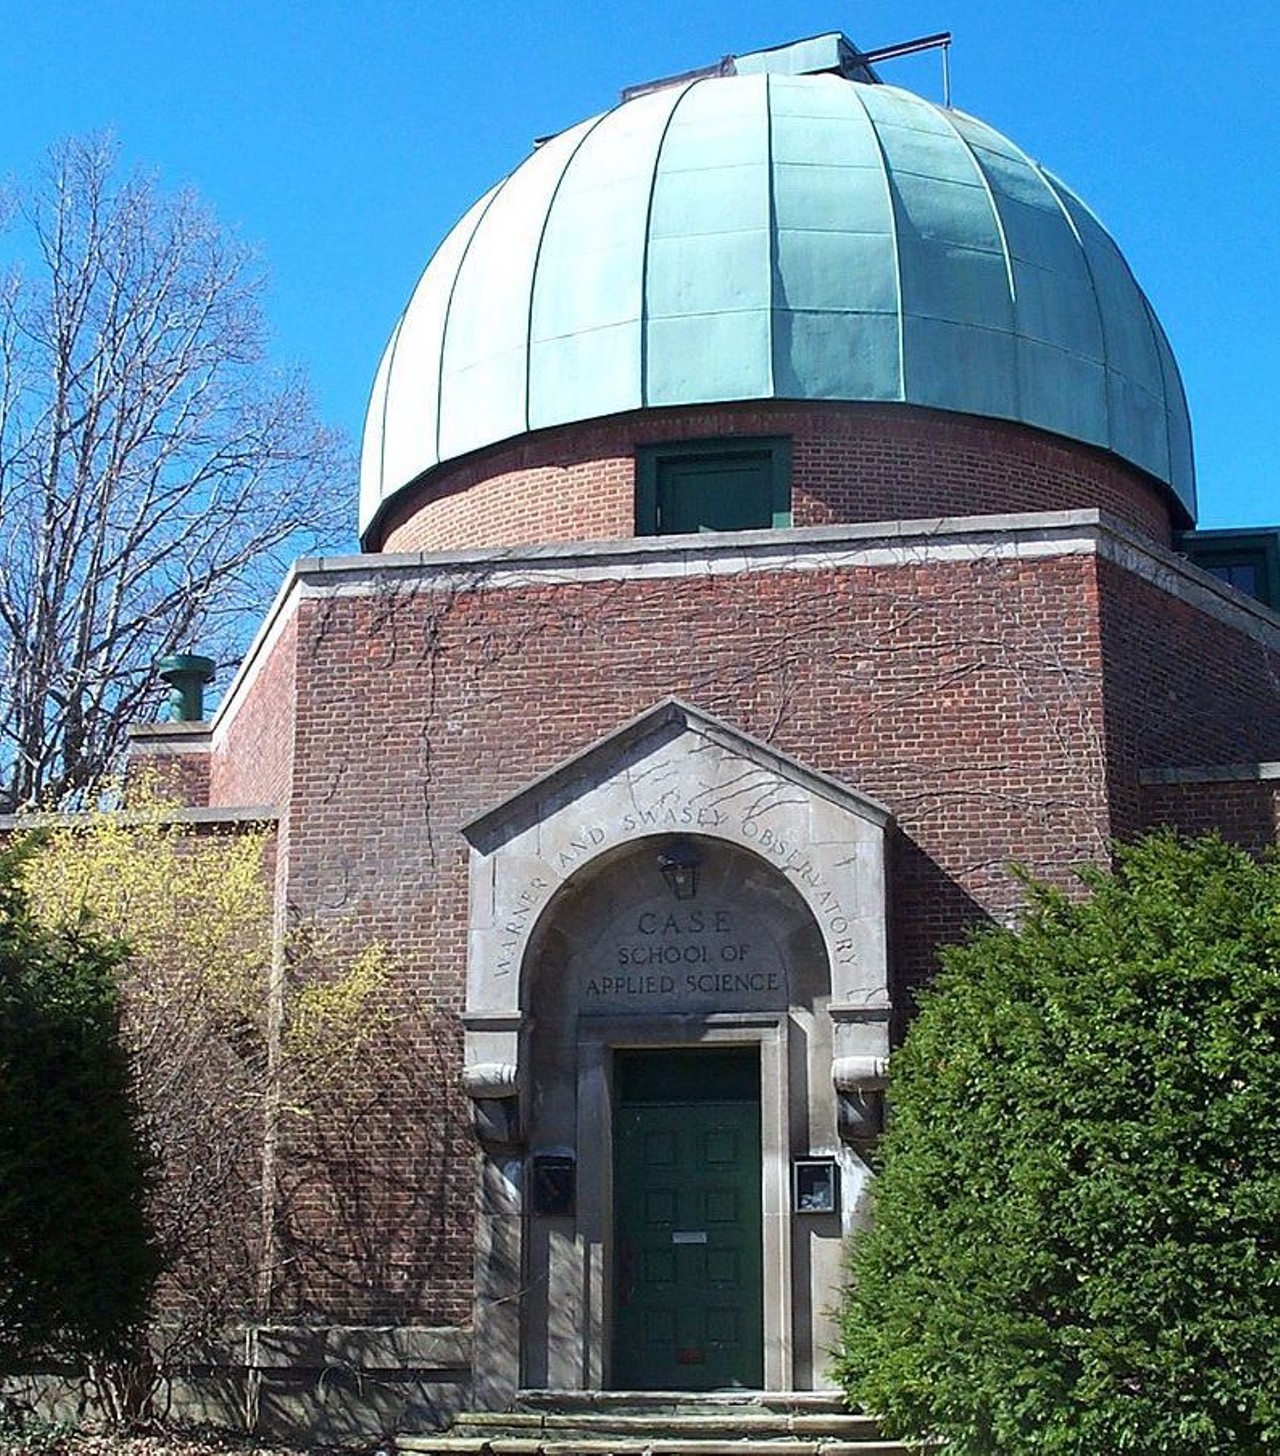  The Warner and Swasey Observatory
11000 Euclid Ave., Cleveland
Originally located on North Taylor in East Cleveland, the Warner and Swasey Observatory was built in 1919 and was once a scientific landmark. Due to rising light pollution of the city, the observatory was shut down in 1980 and moved from its original location to the Case Western Campus where the telescope is today.